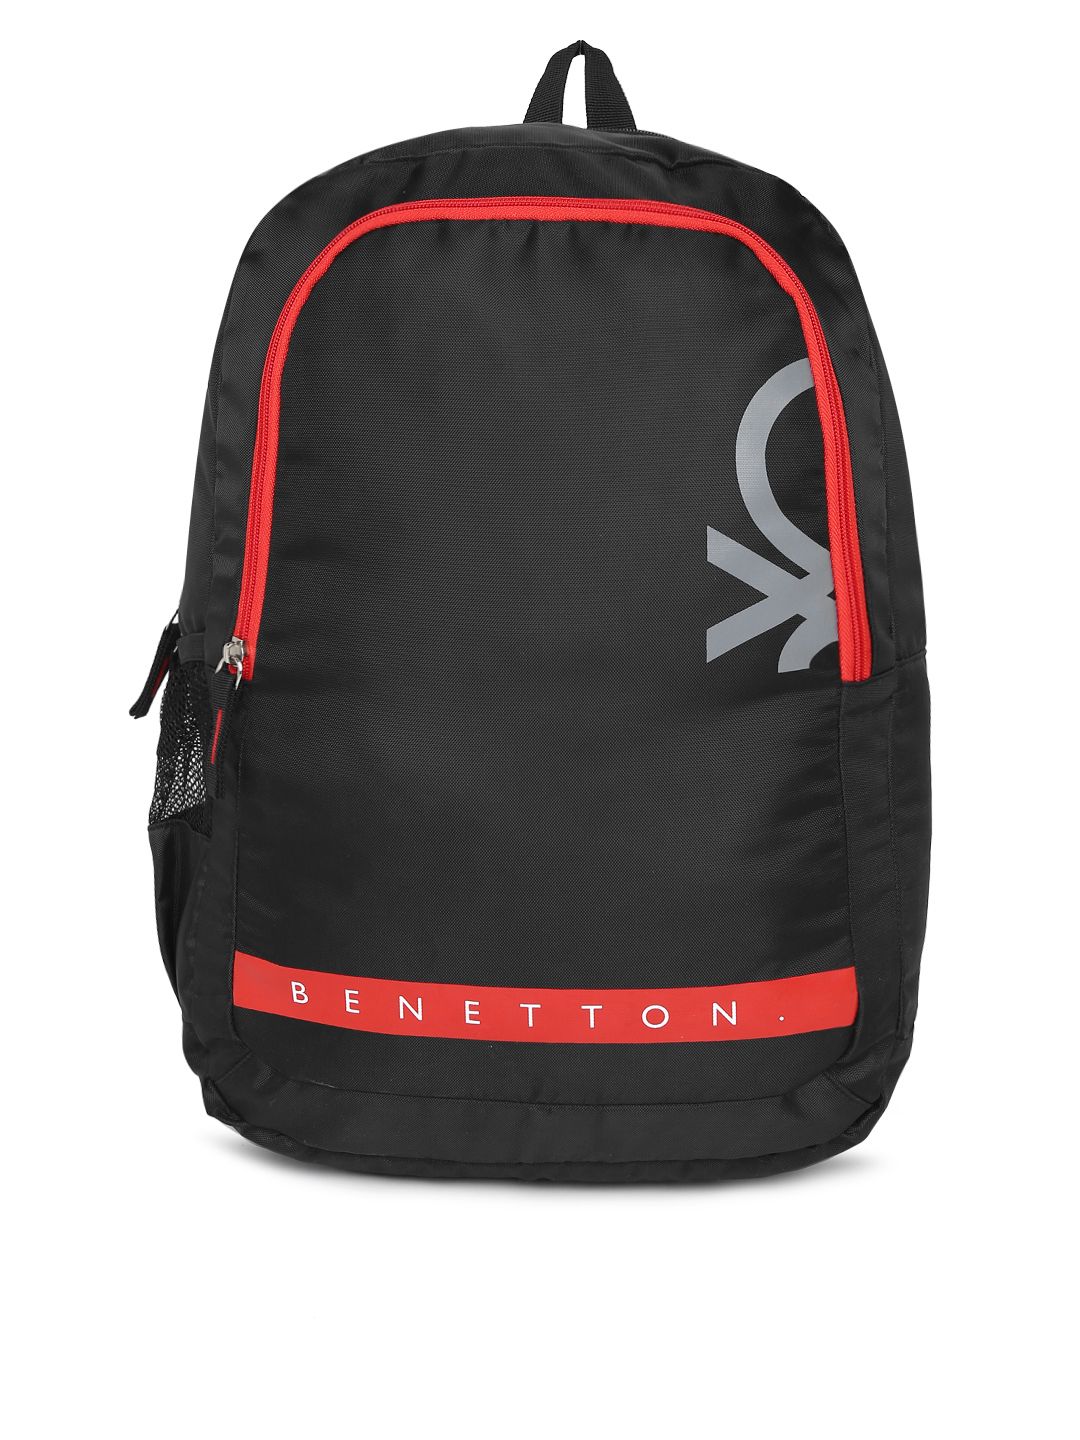 United Colors of Benetton Unisex Black & Red Brand Logo Backpack Price in India